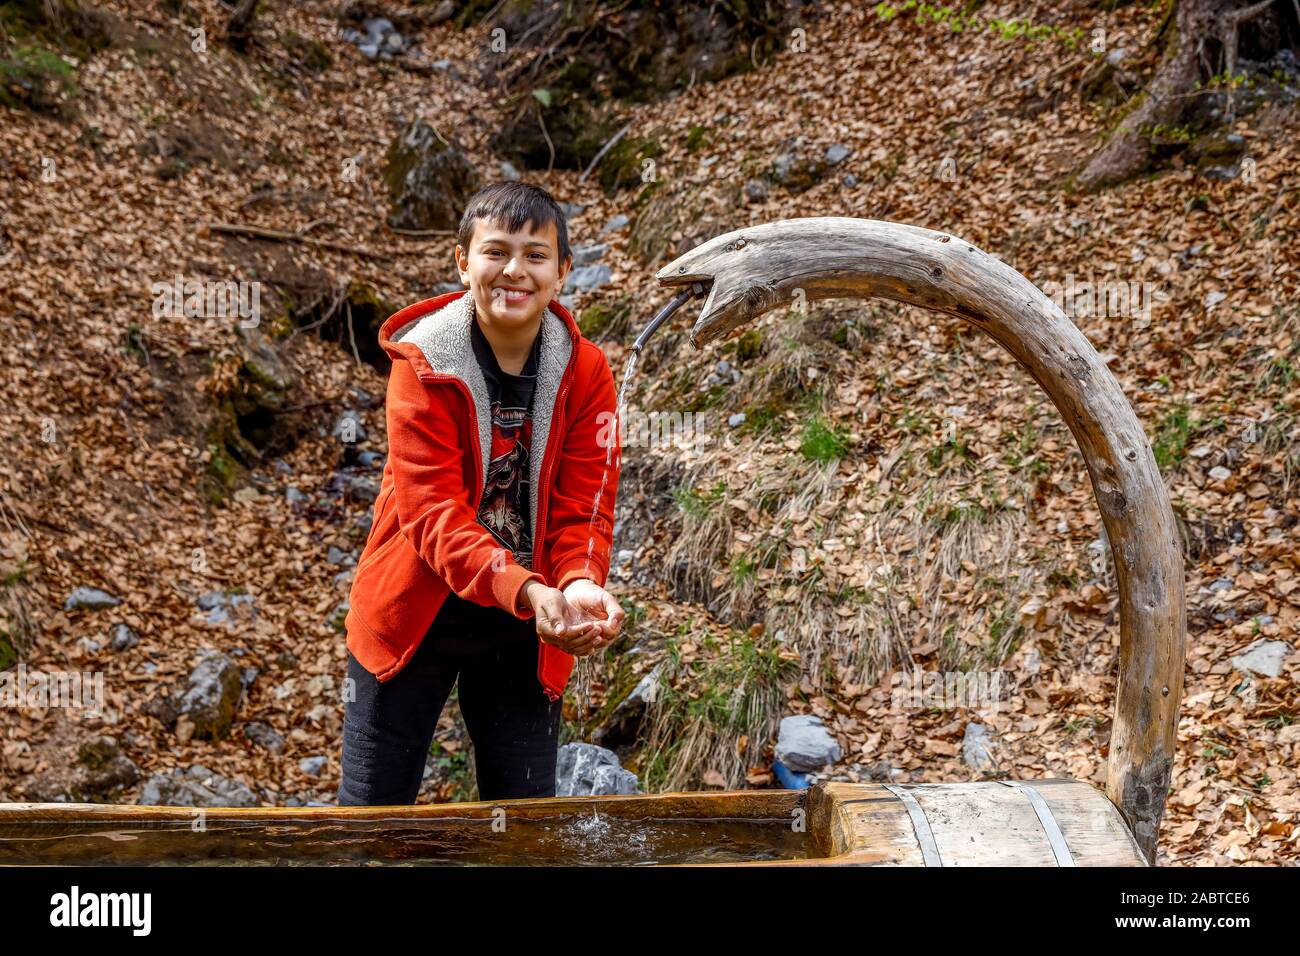 13-year-old boy getting fresh water in Haute Savoie, France. Stock Photo